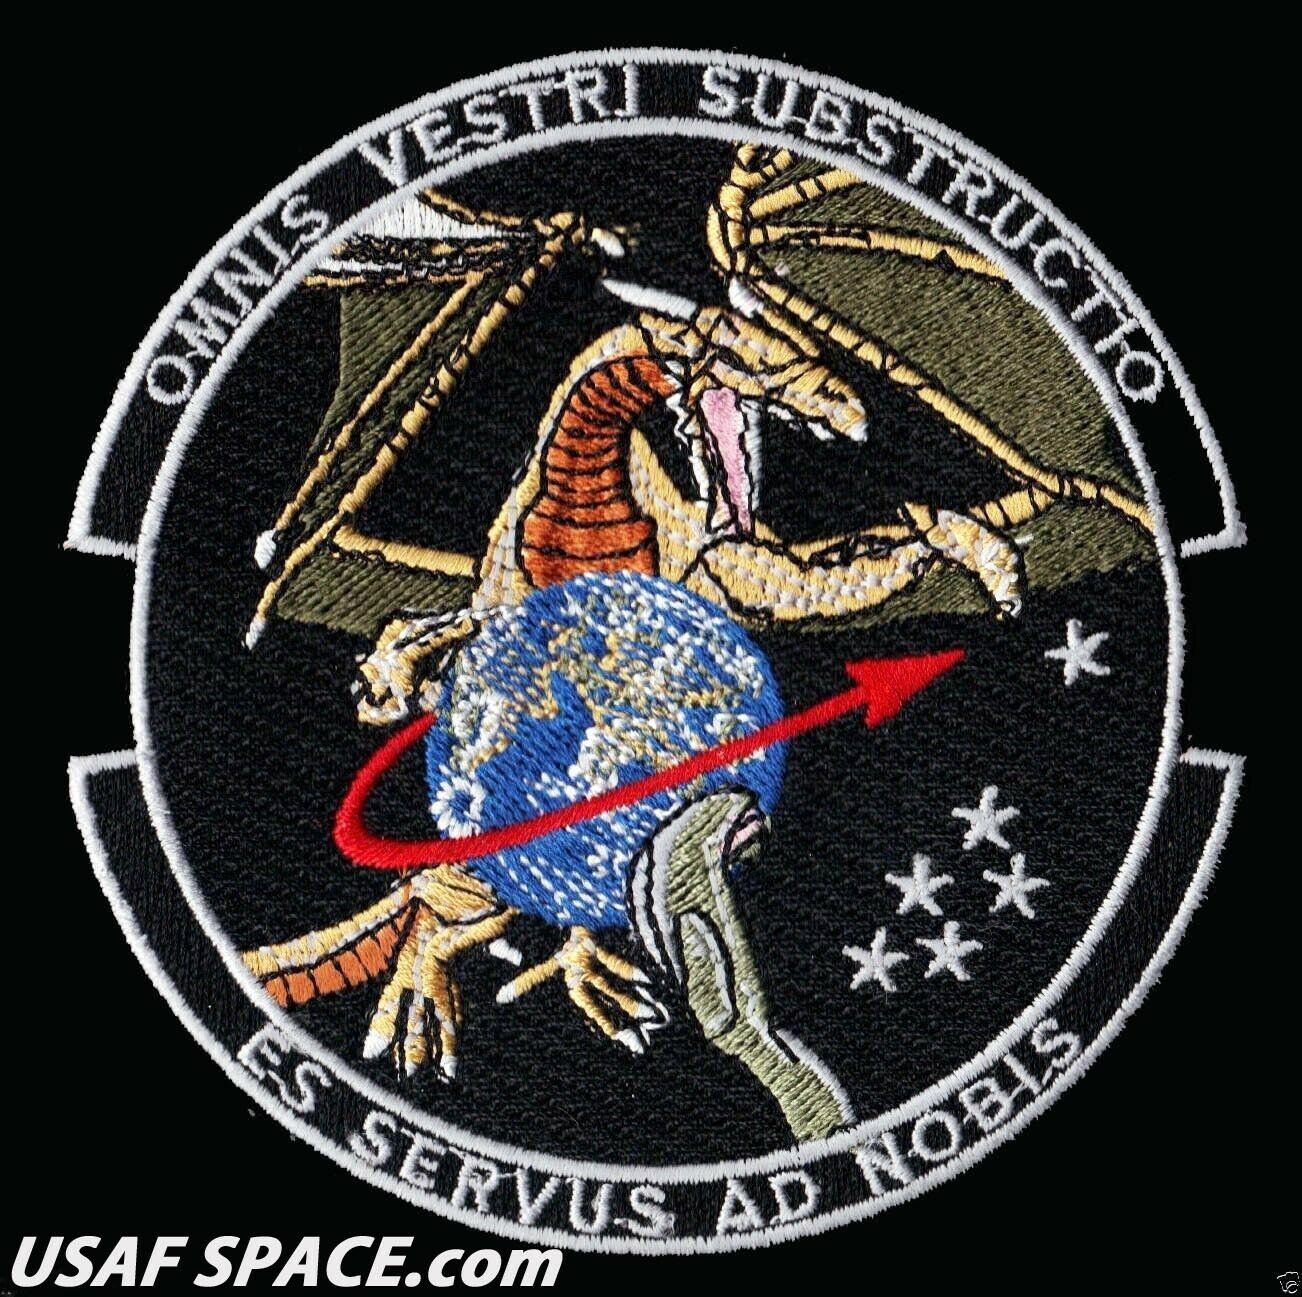 Sigint Space Dragon Area 51 Black Ops Usaf Non-commercial Patch - Mint